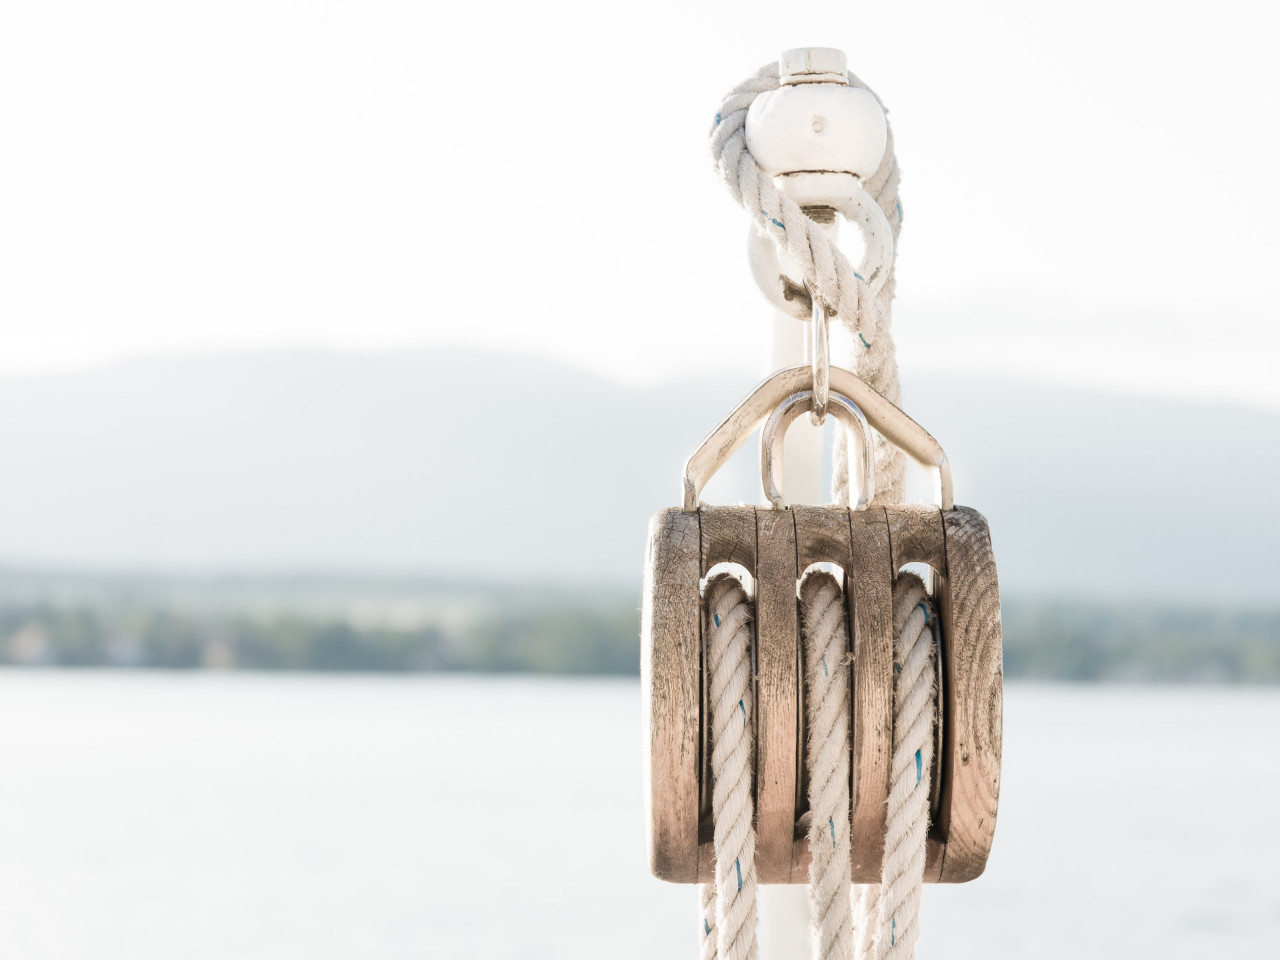 Pulley on a boat wallpaper 1280x960